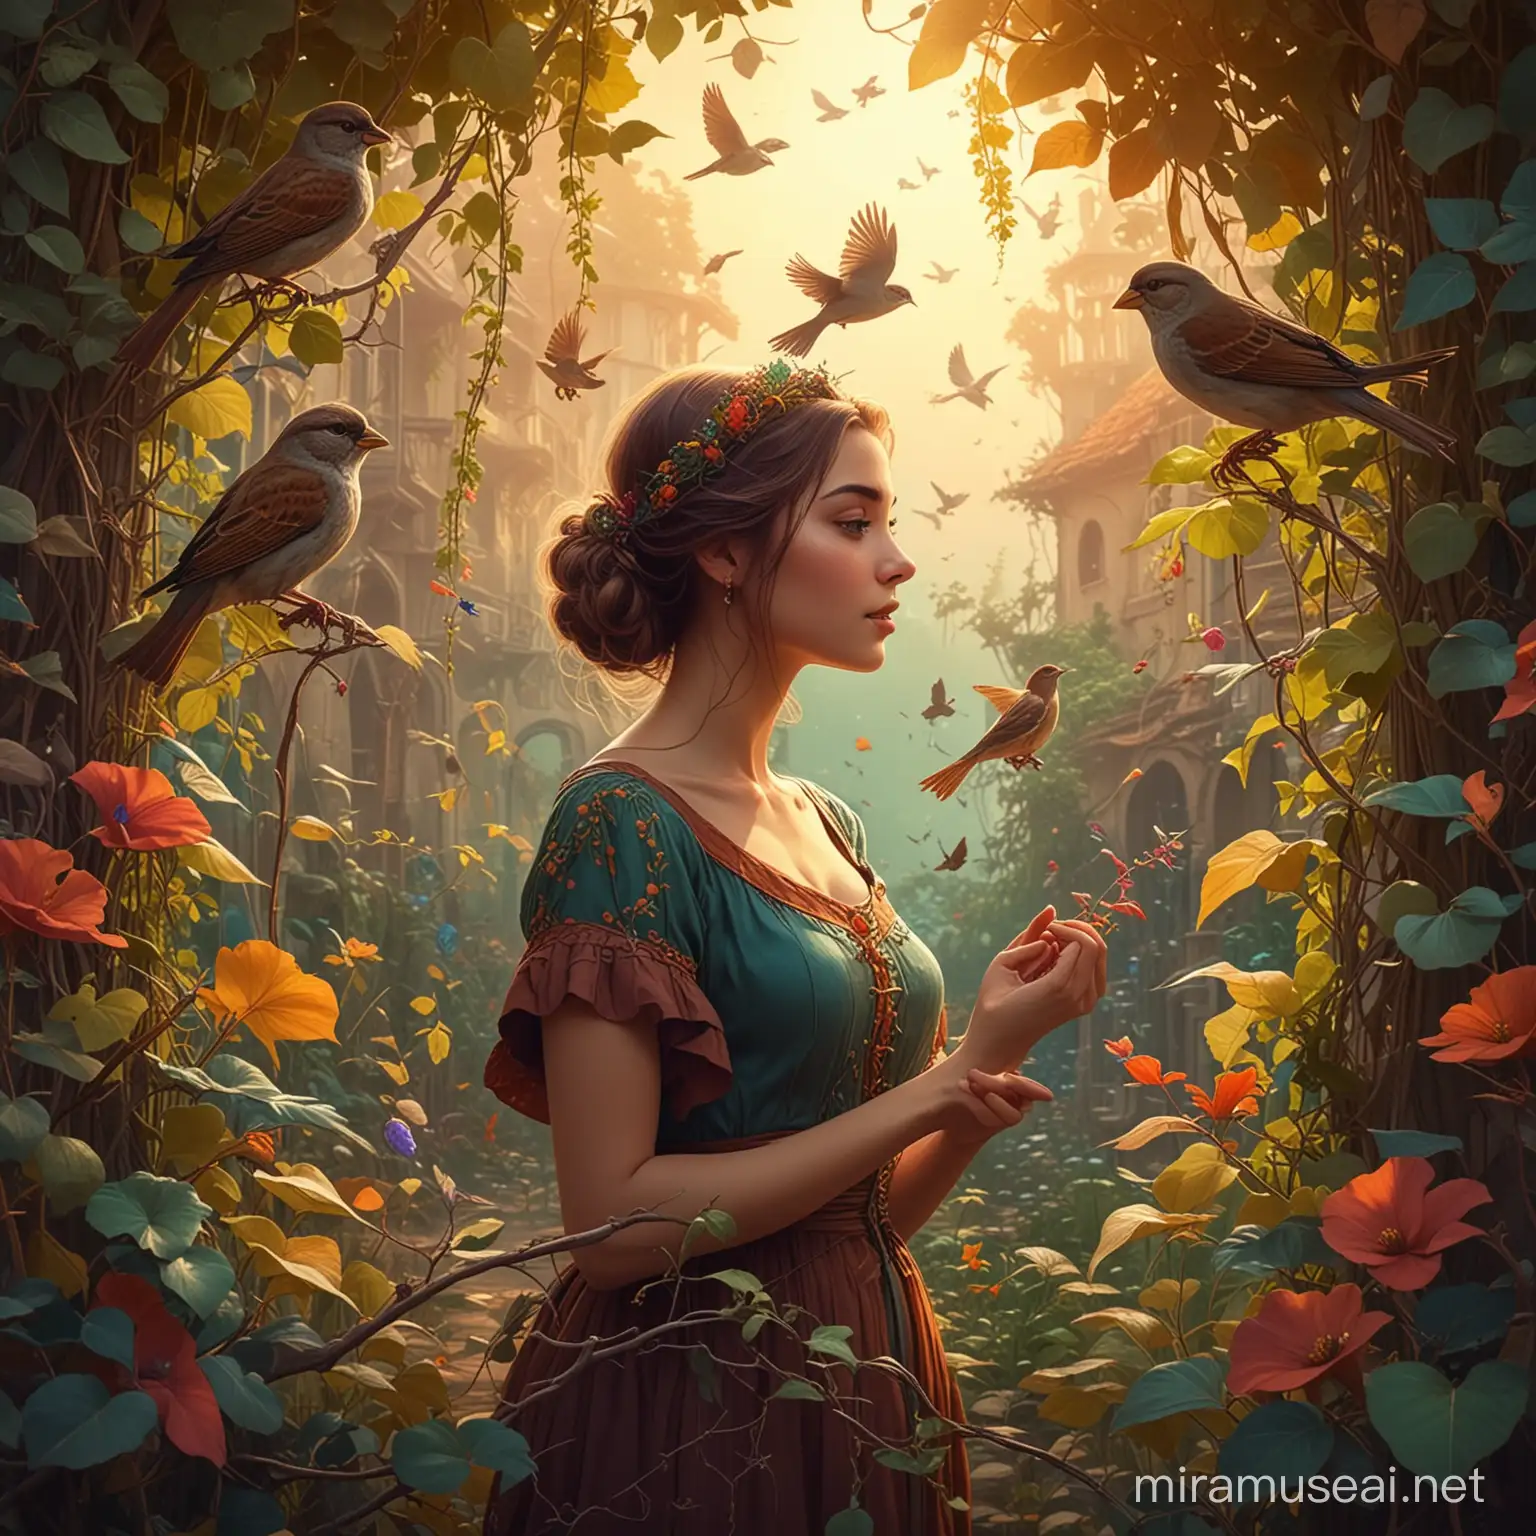 Vintage Animation Young Woman with Sparrow in a Colorful Mystical World Surrounded by Vines